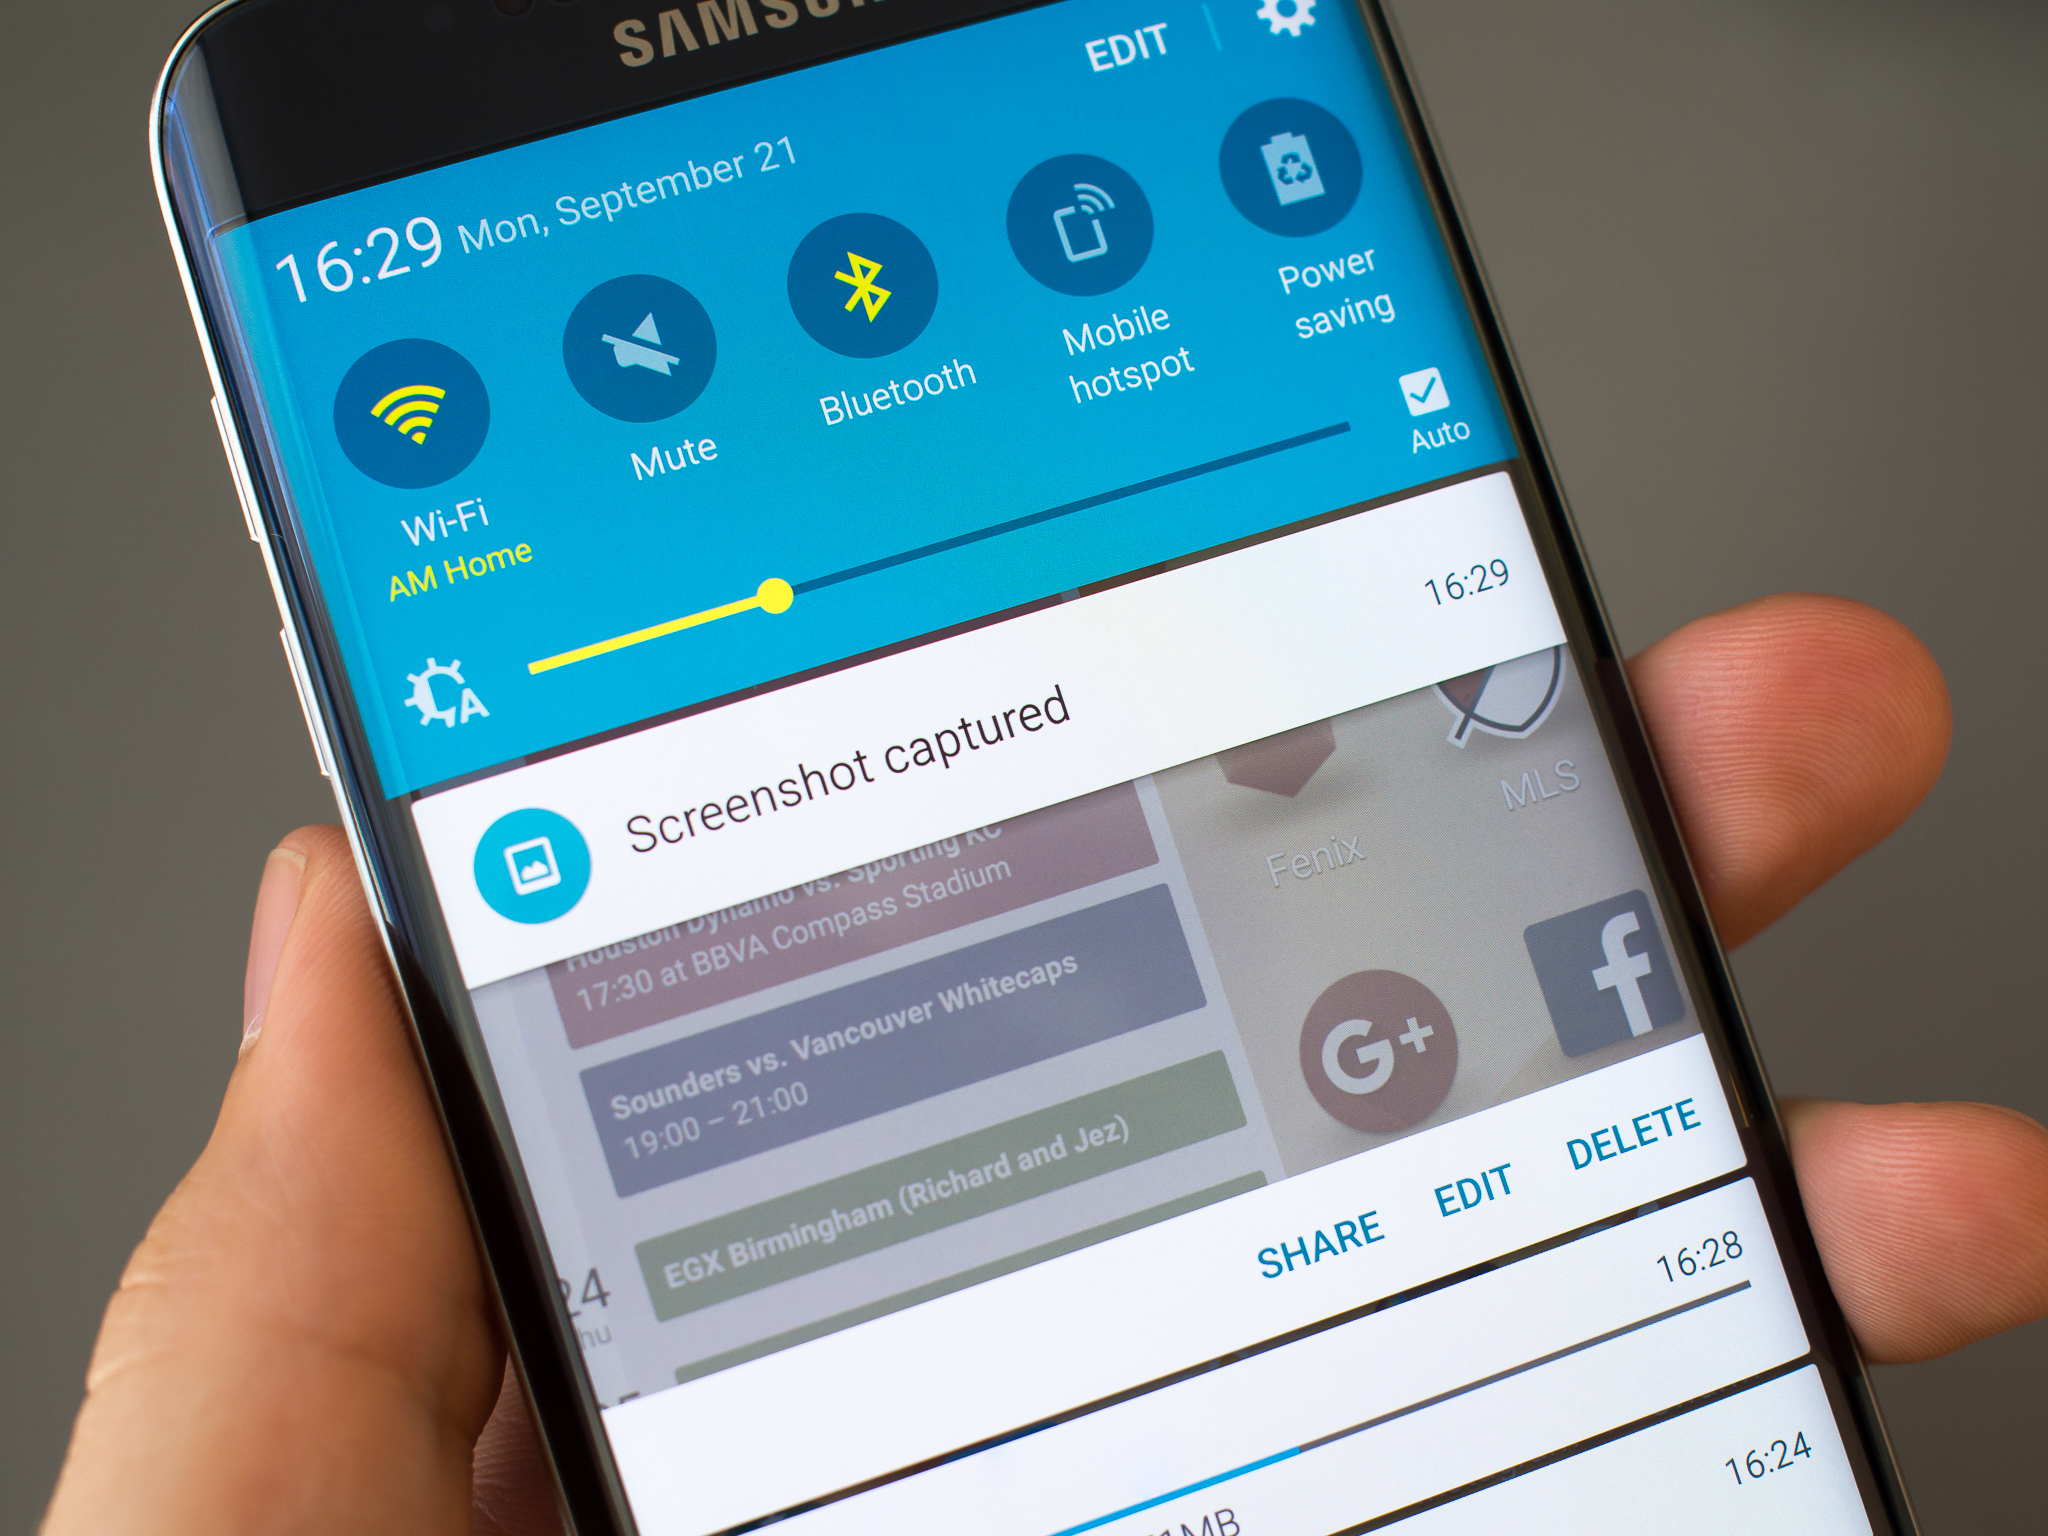 How To Take A Screenshot On The Galaxy S6 Edge Android Central